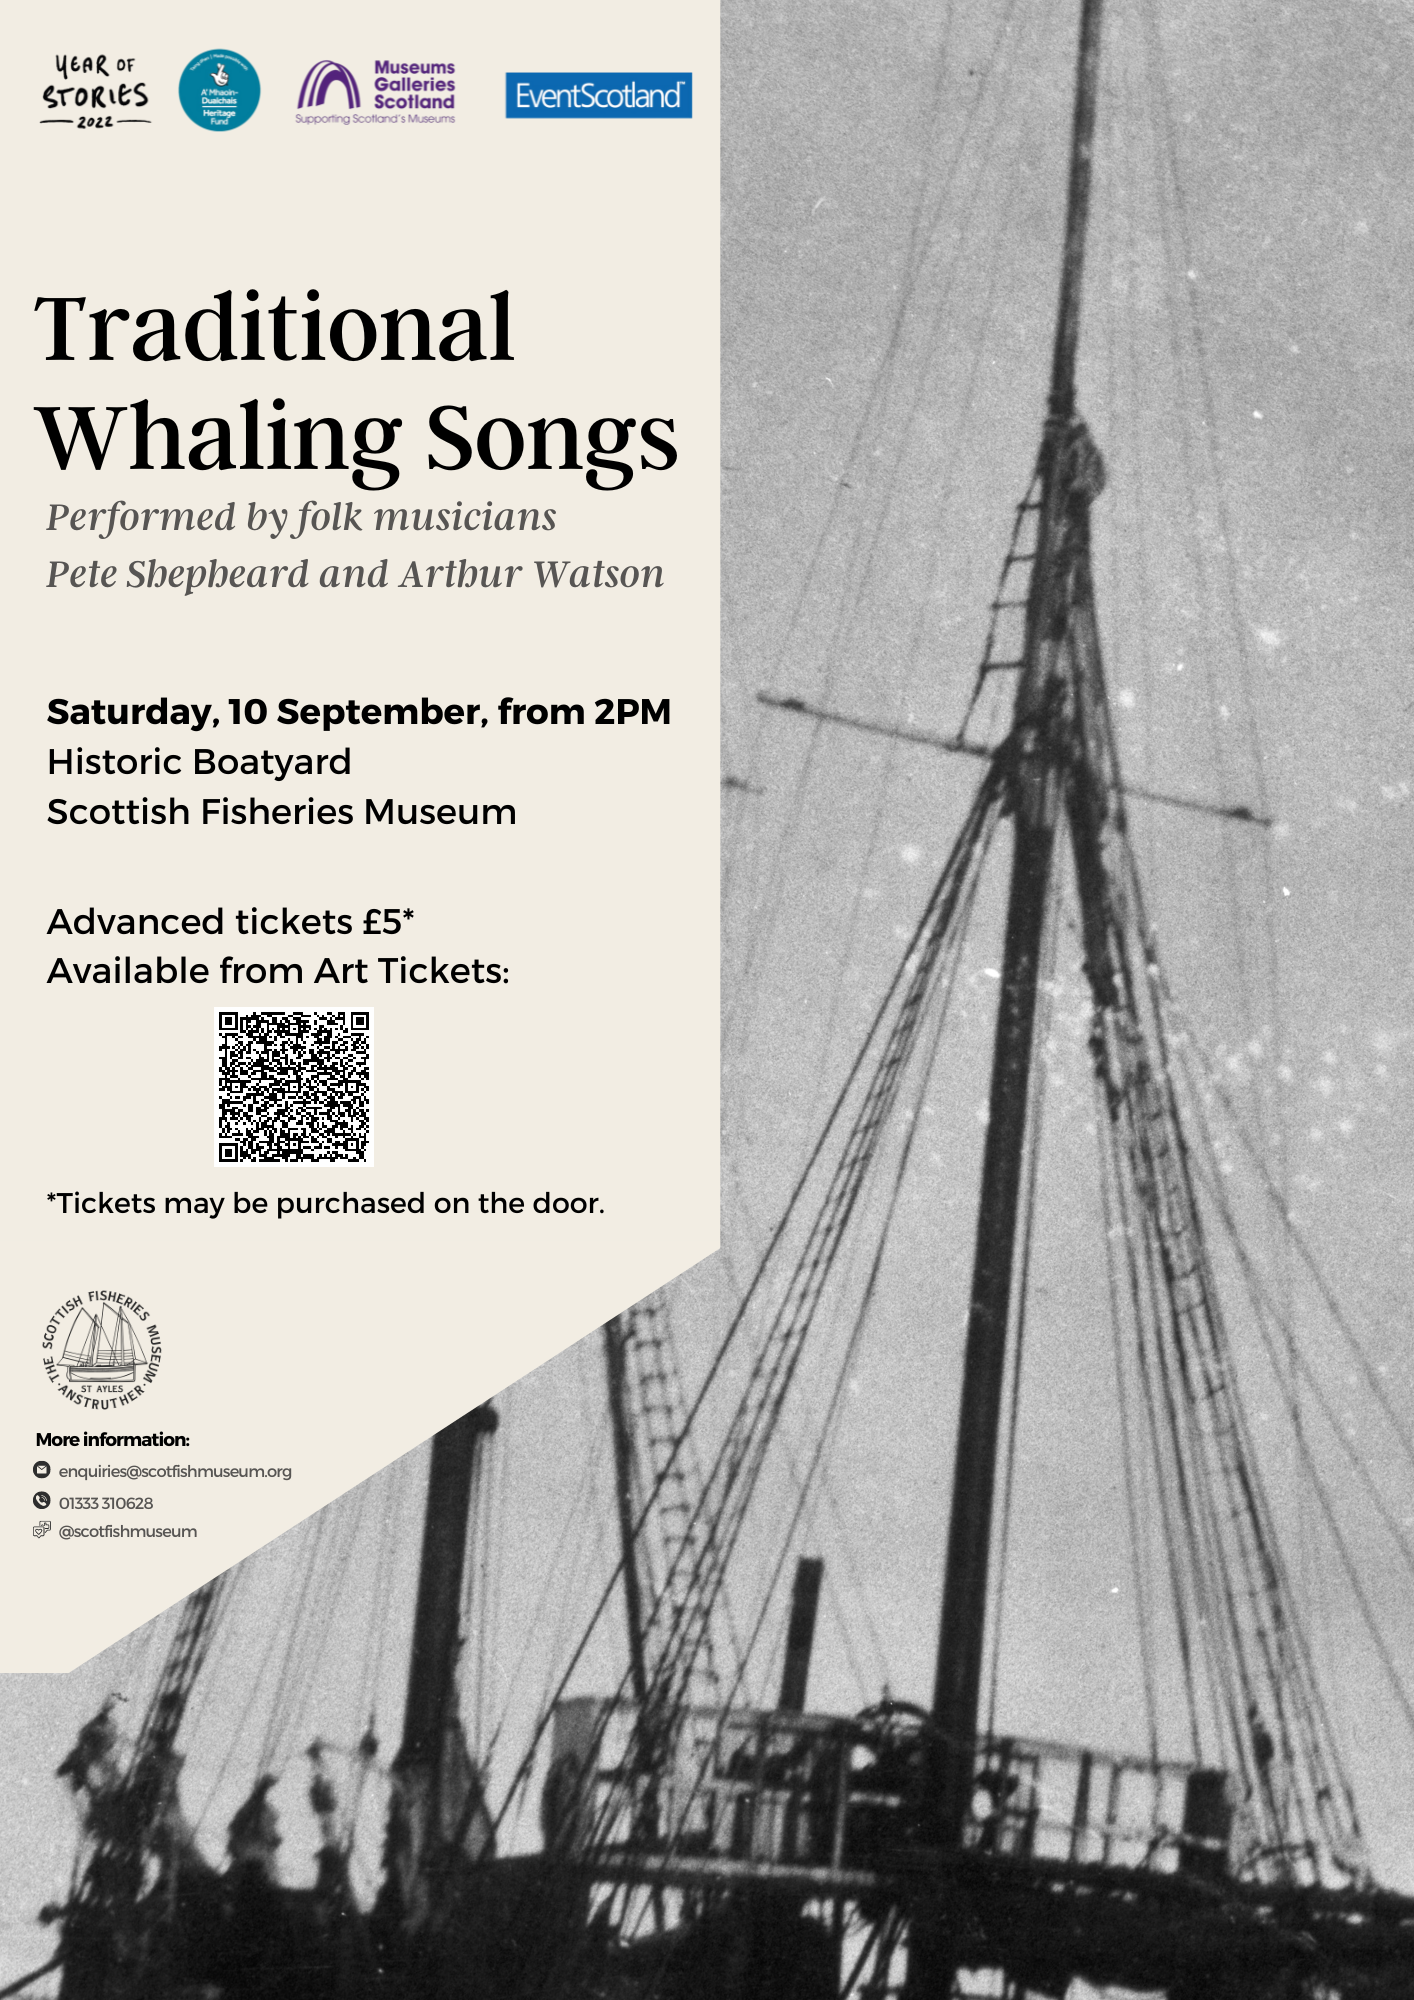 Traditional Whaling Songs performed by Peter Shepheard and Arthur Watson